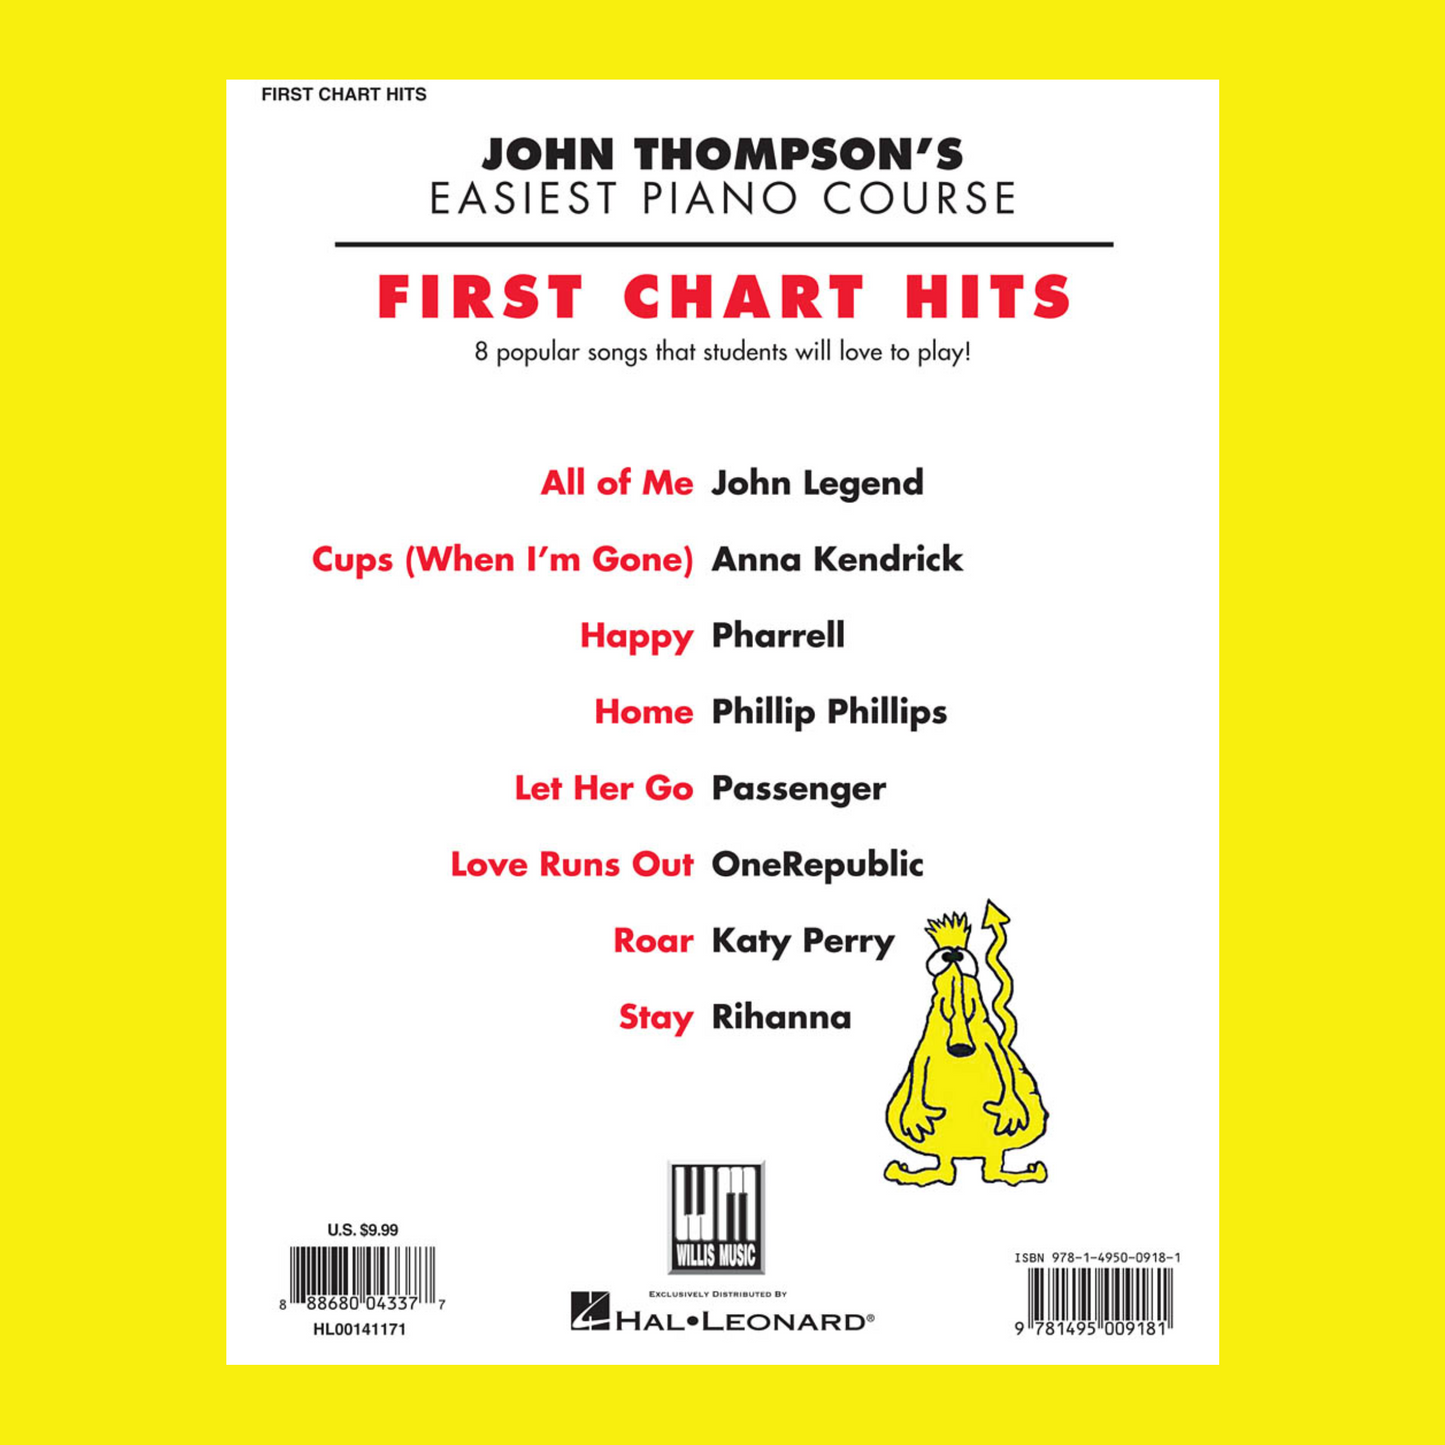 John Thompson's Easiest Piano Course - First Chart Hits Book